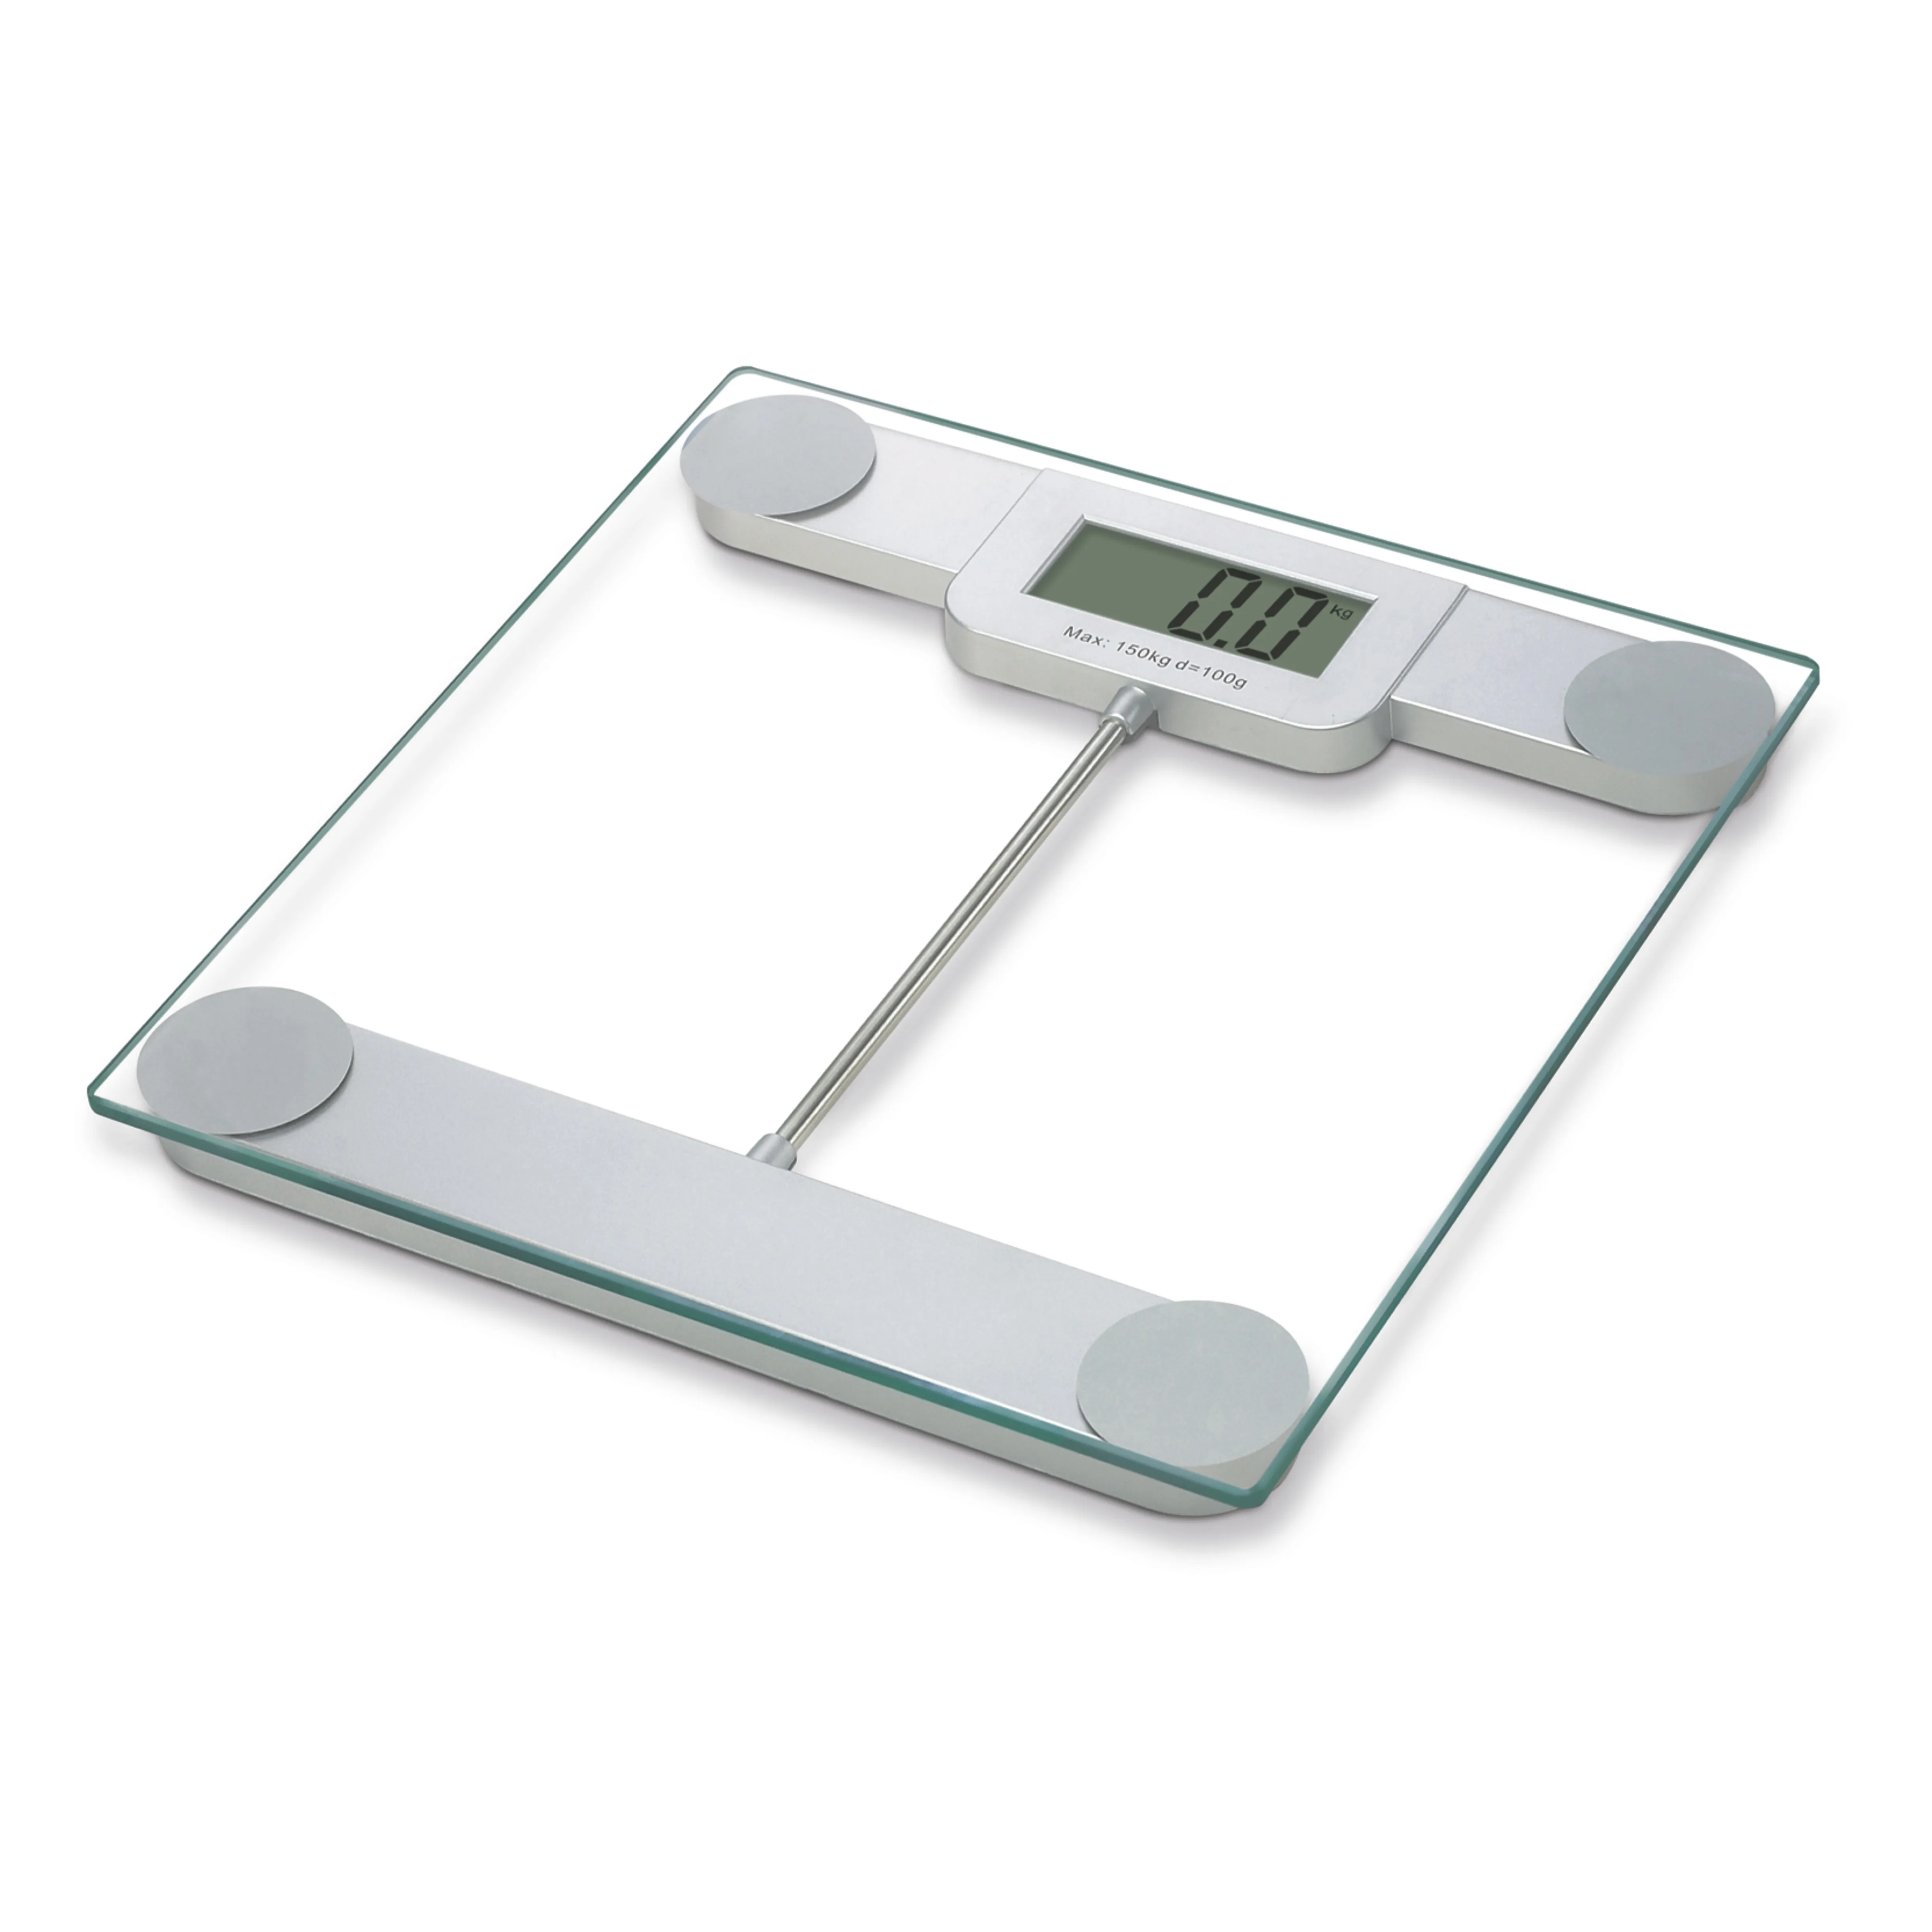 Royalford Metallic Digital Body Scale - Smart High Accuracy Large Lcd Screen Auto ON/OFF & Multiple Measuring Unit 150kg Slim Design 5mm Crystal Clear Tempered Glass (28 28 2.2 Cm)